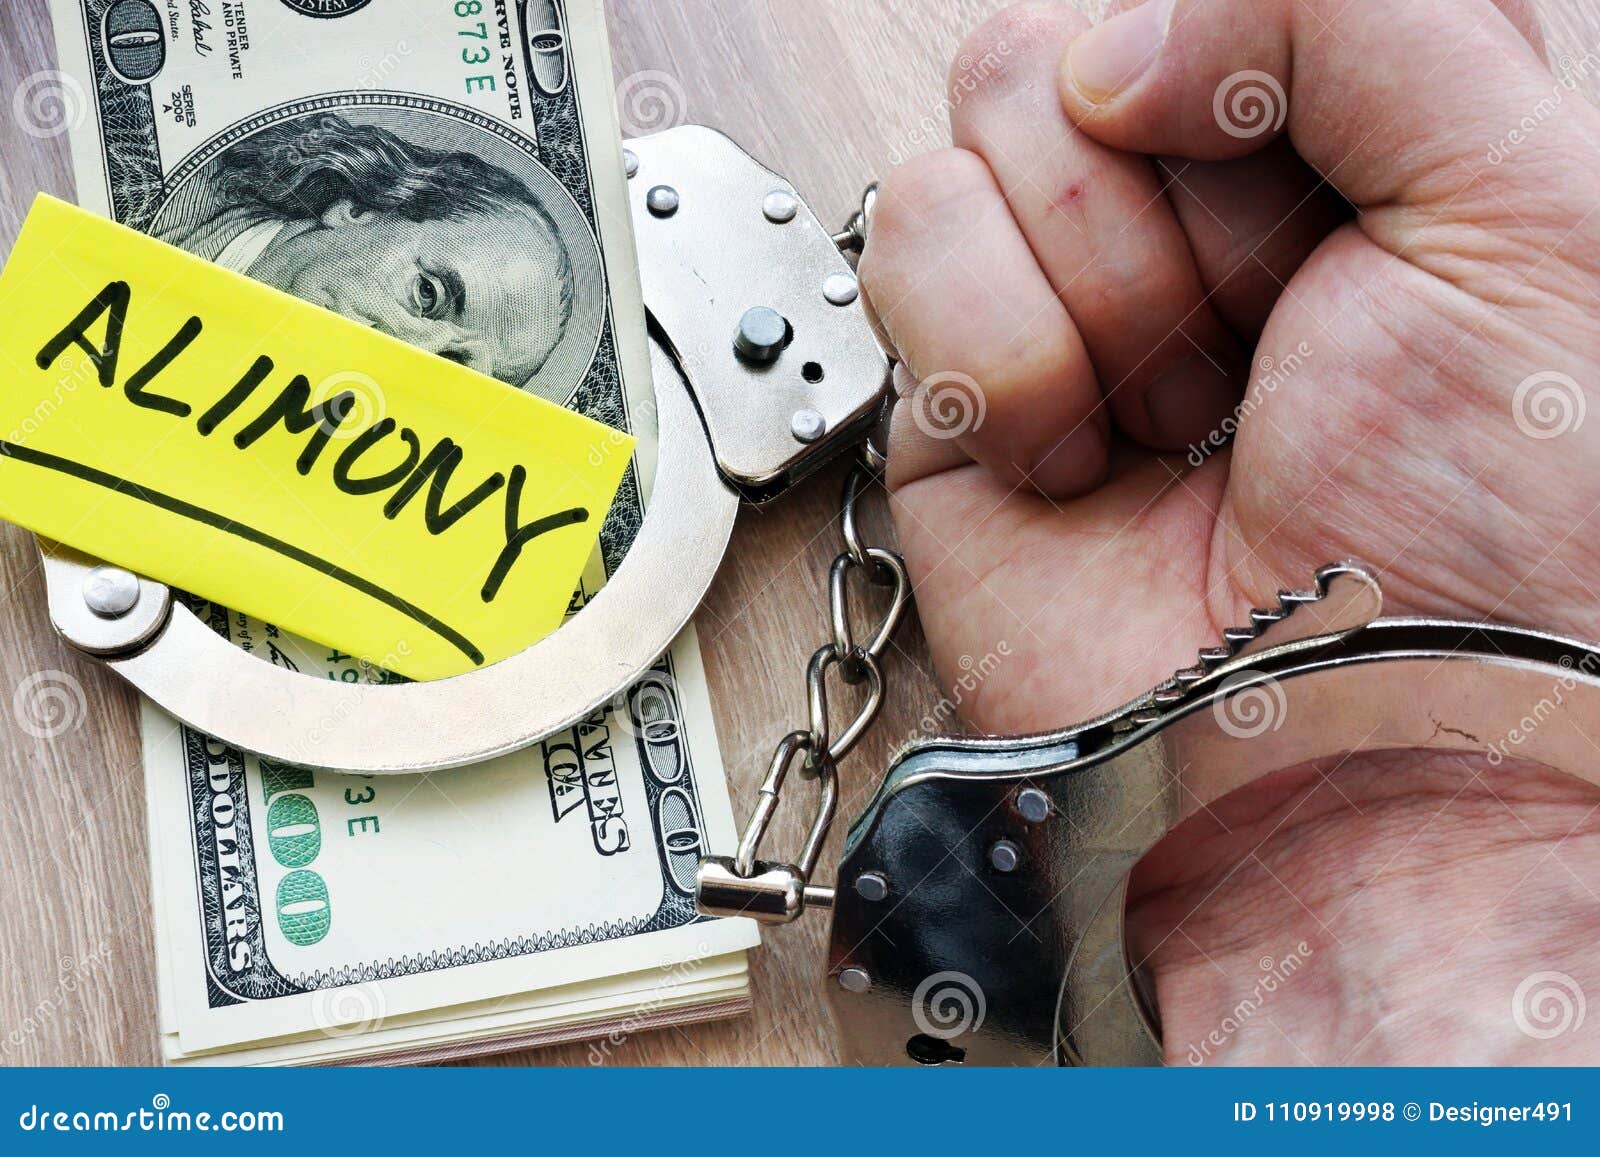 alimony and hand in handcuffs. legal separation.